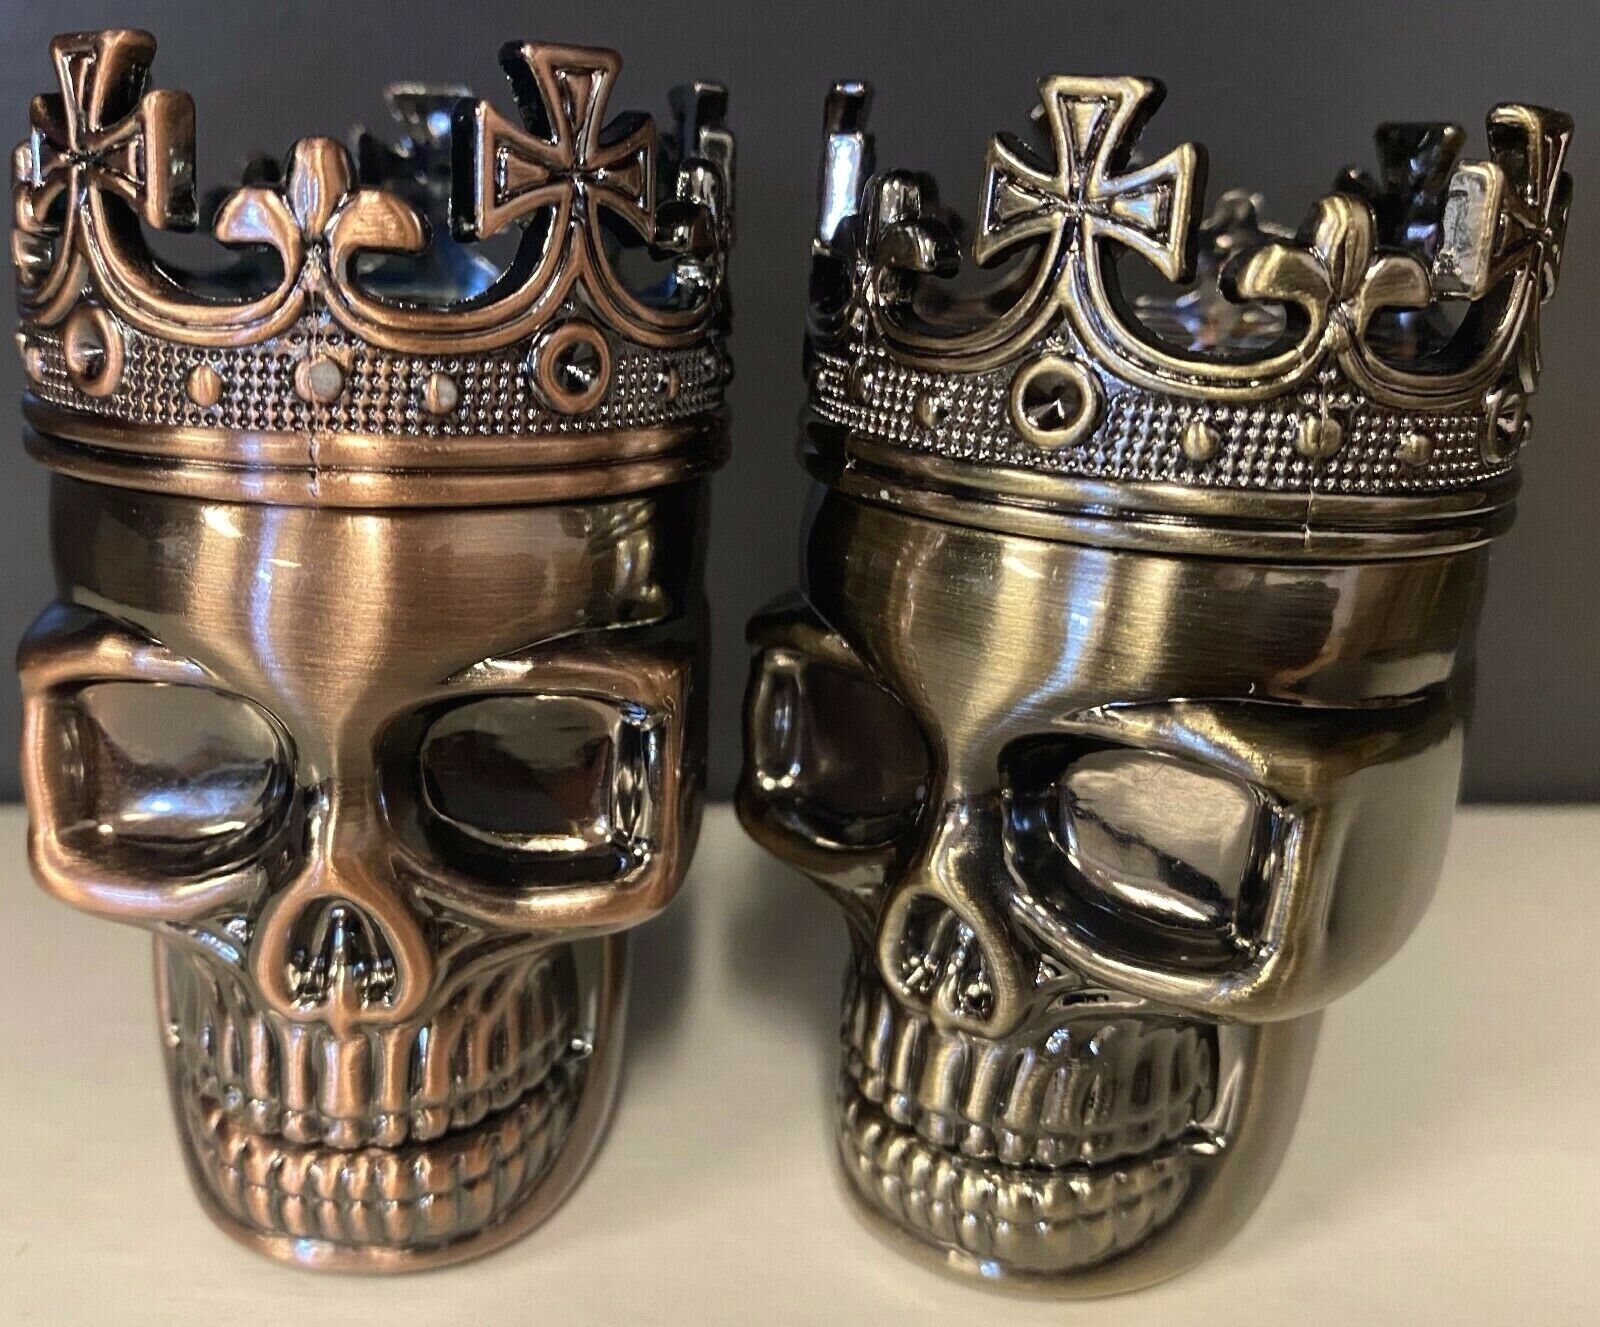 3 Piece Skull Metal Alloy Tobacco Spice Grinder Crusher USA Seller W/ Gift Box